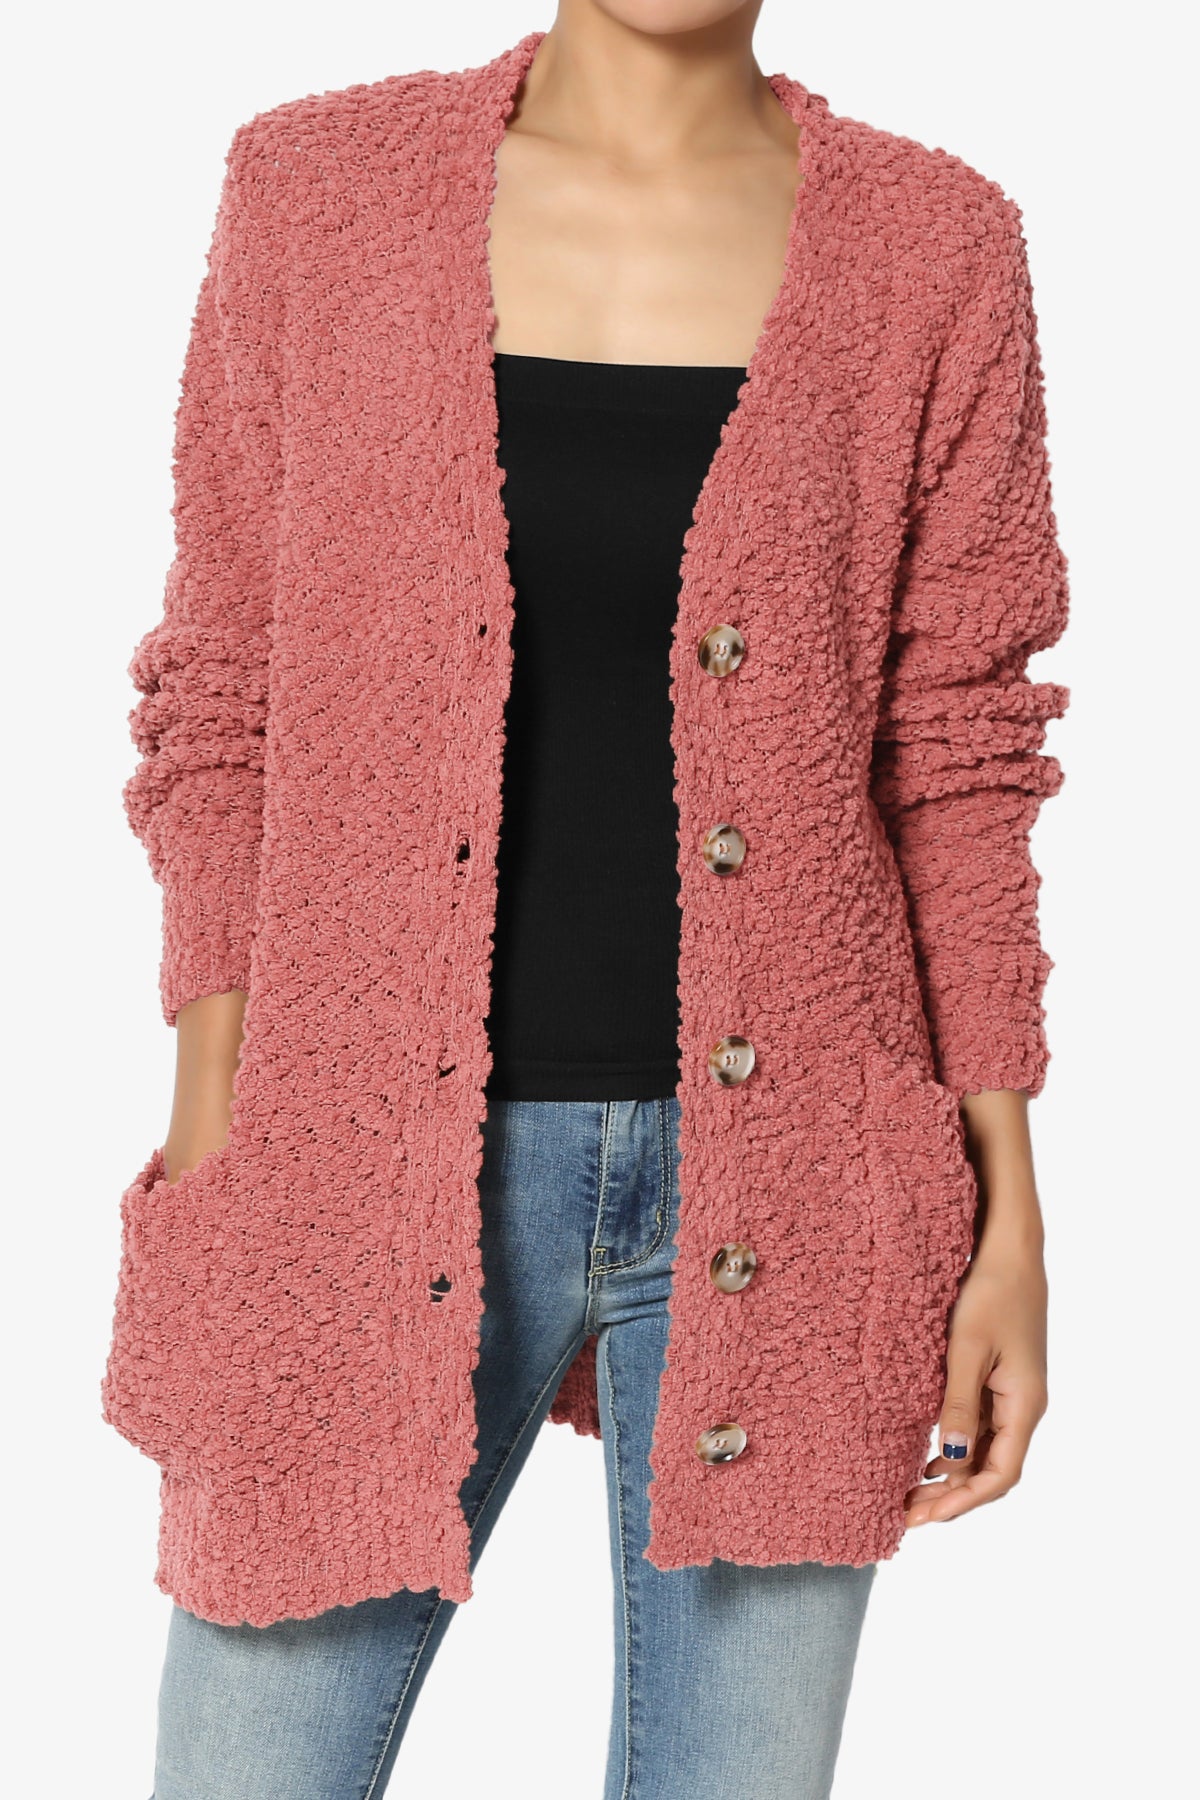 Barry Button Teddy Knit Sweater Cardigan DUSTY ROSE_1